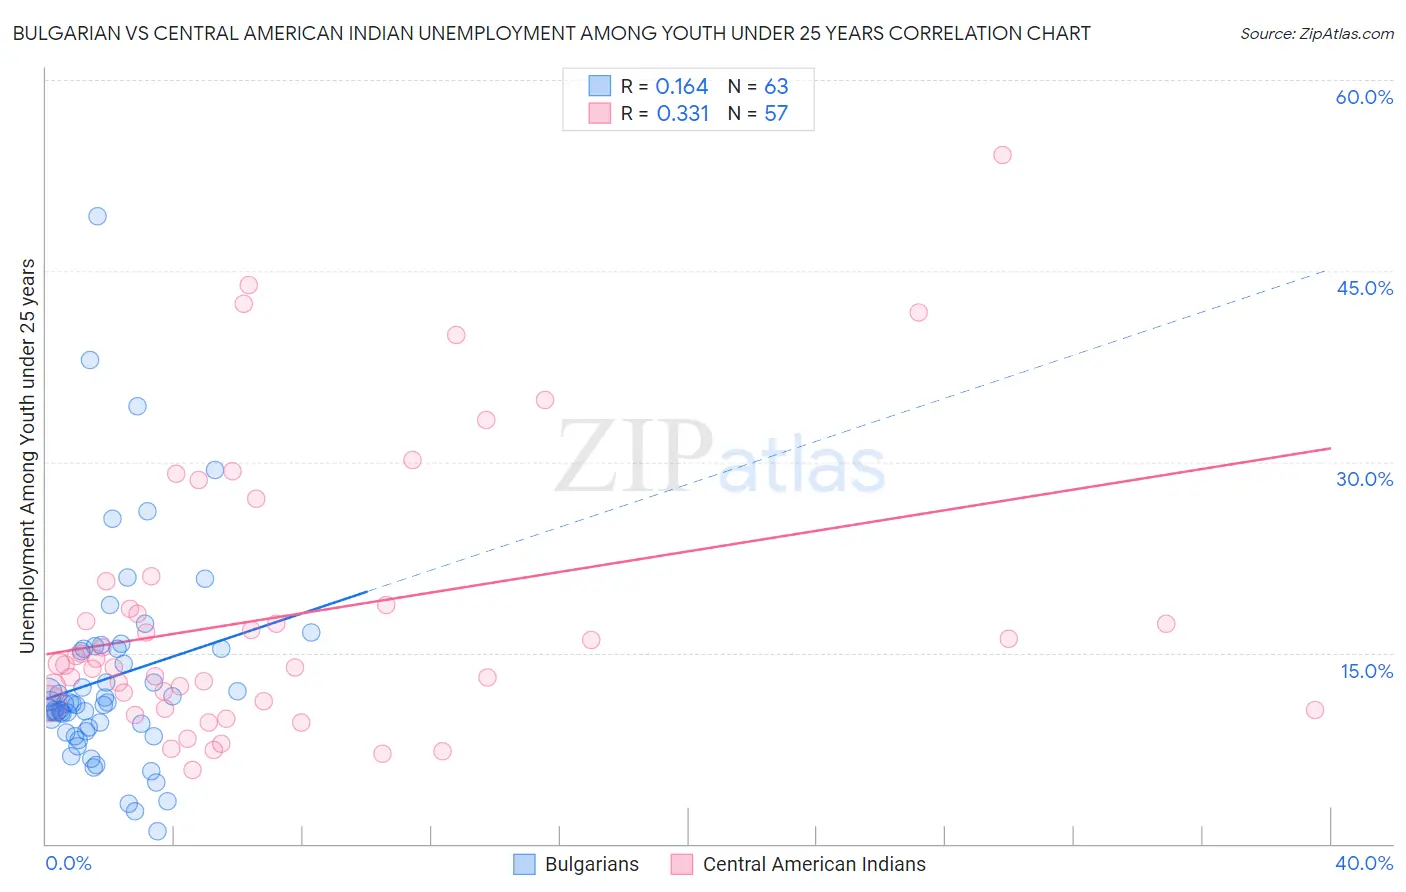 Bulgarian vs Central American Indian Unemployment Among Youth under 25 years